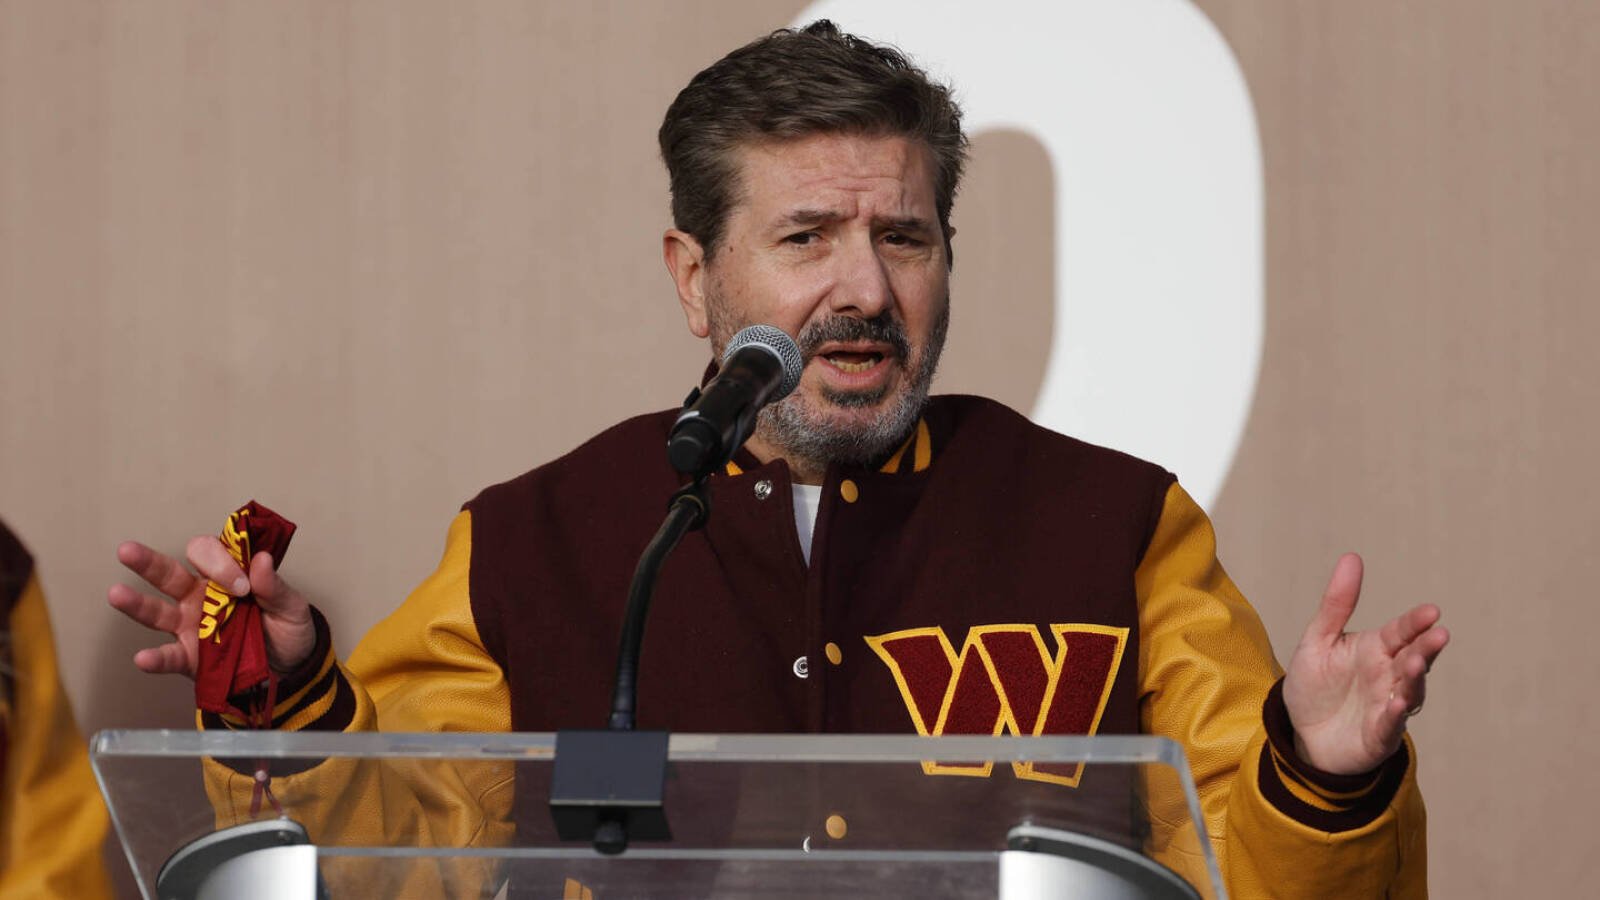 Building new stadium could get NFL owners to 'forgive' Dan Snyder?